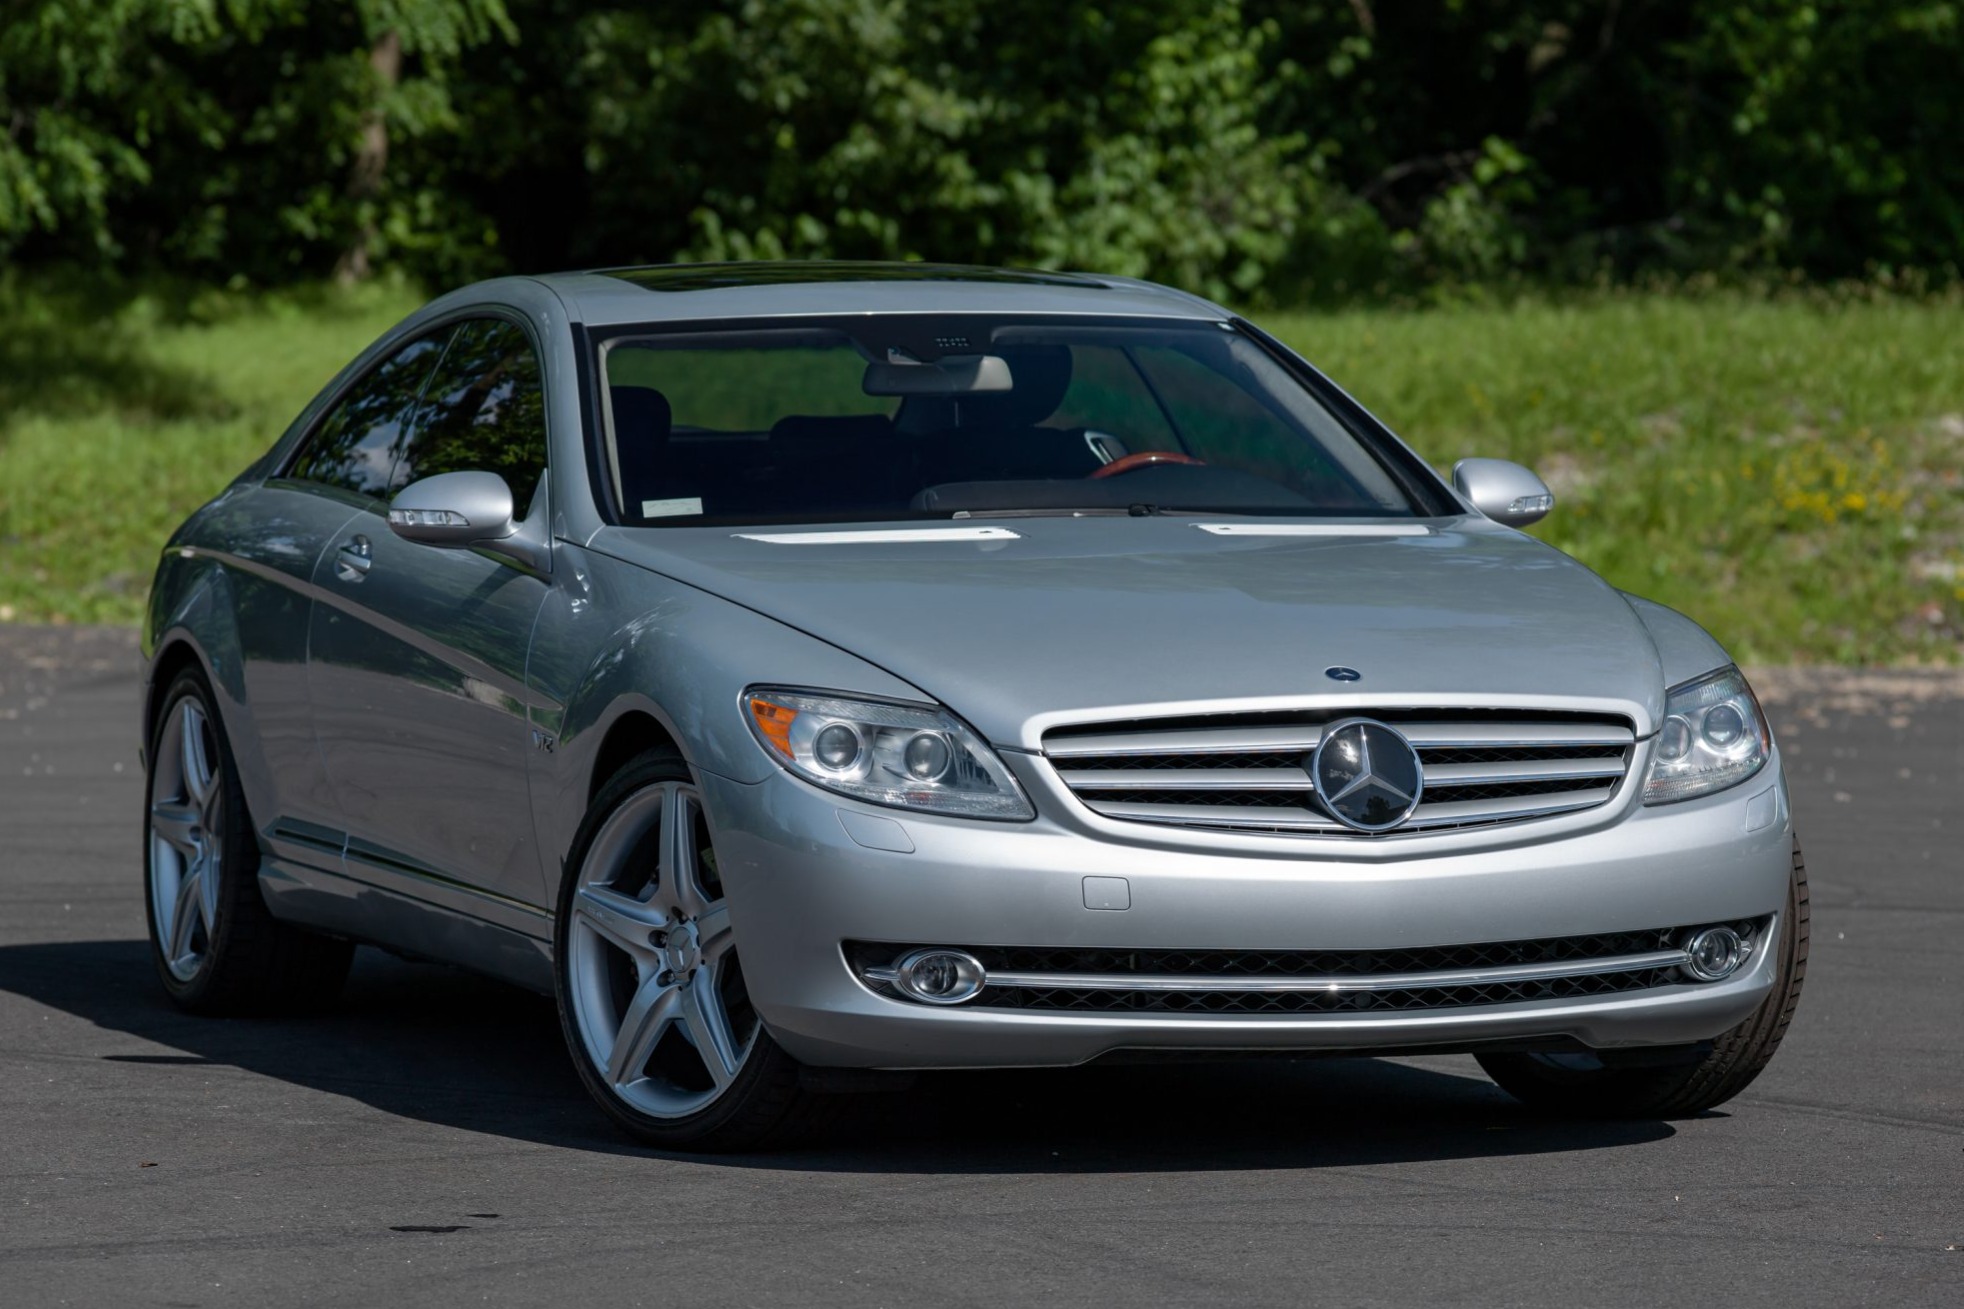 Used 23k-Mile 2008 Mercedes-Benz CL600 Review